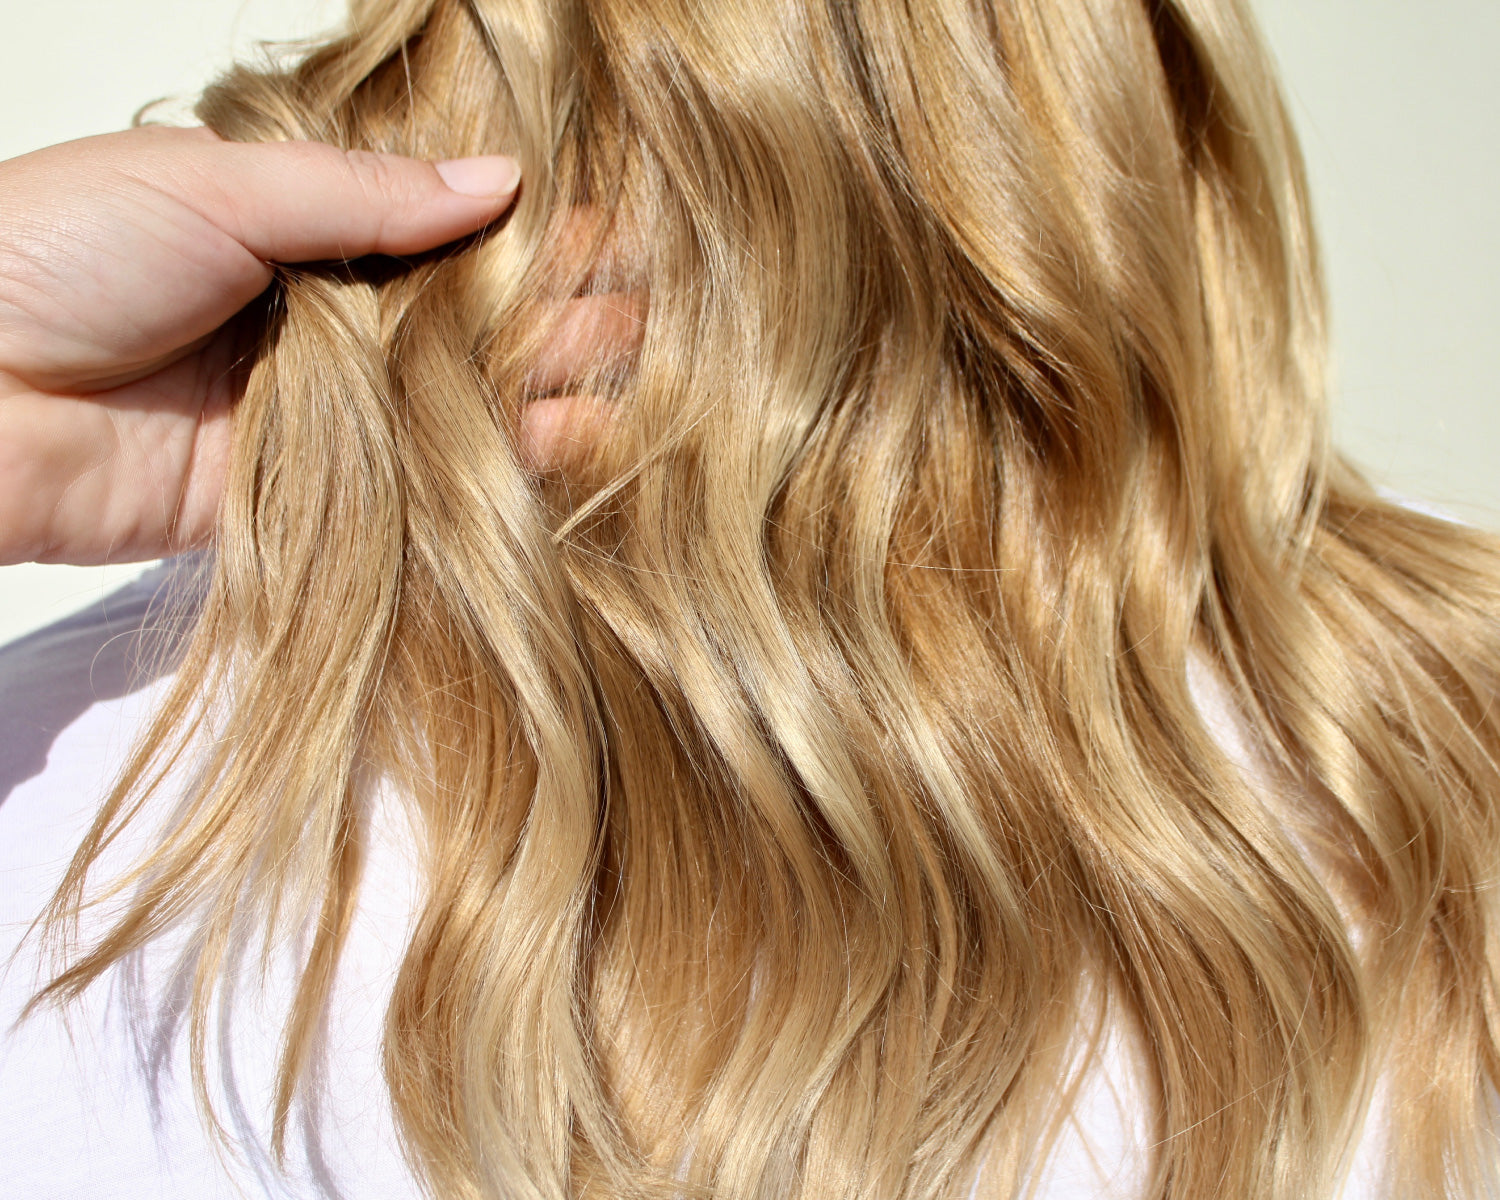 4. How to maintain blonde hair - wide 7